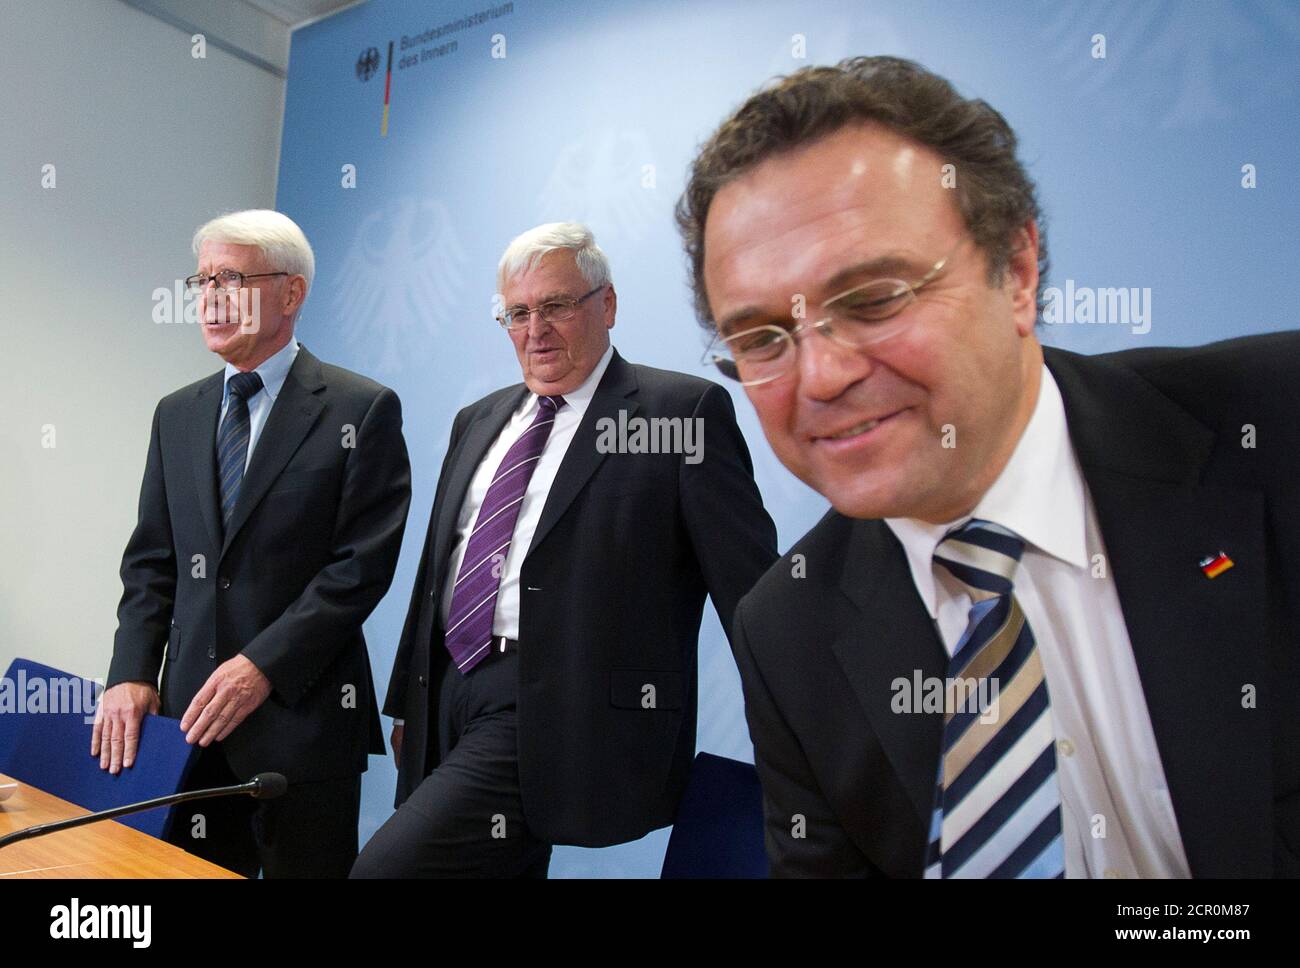 German Interior Minister Hans-Peter Friedrich (R) and President of the German Football Association (DFB),Theo Zwanziger (2nd R), and German Soccer League President Reinhard Rauball arrive at a news conference after a round table on violence during and after soccer matches, in Berlin November 14, 2011.  REUTERS/Thomas Peter (GERMANY) Stock Photo